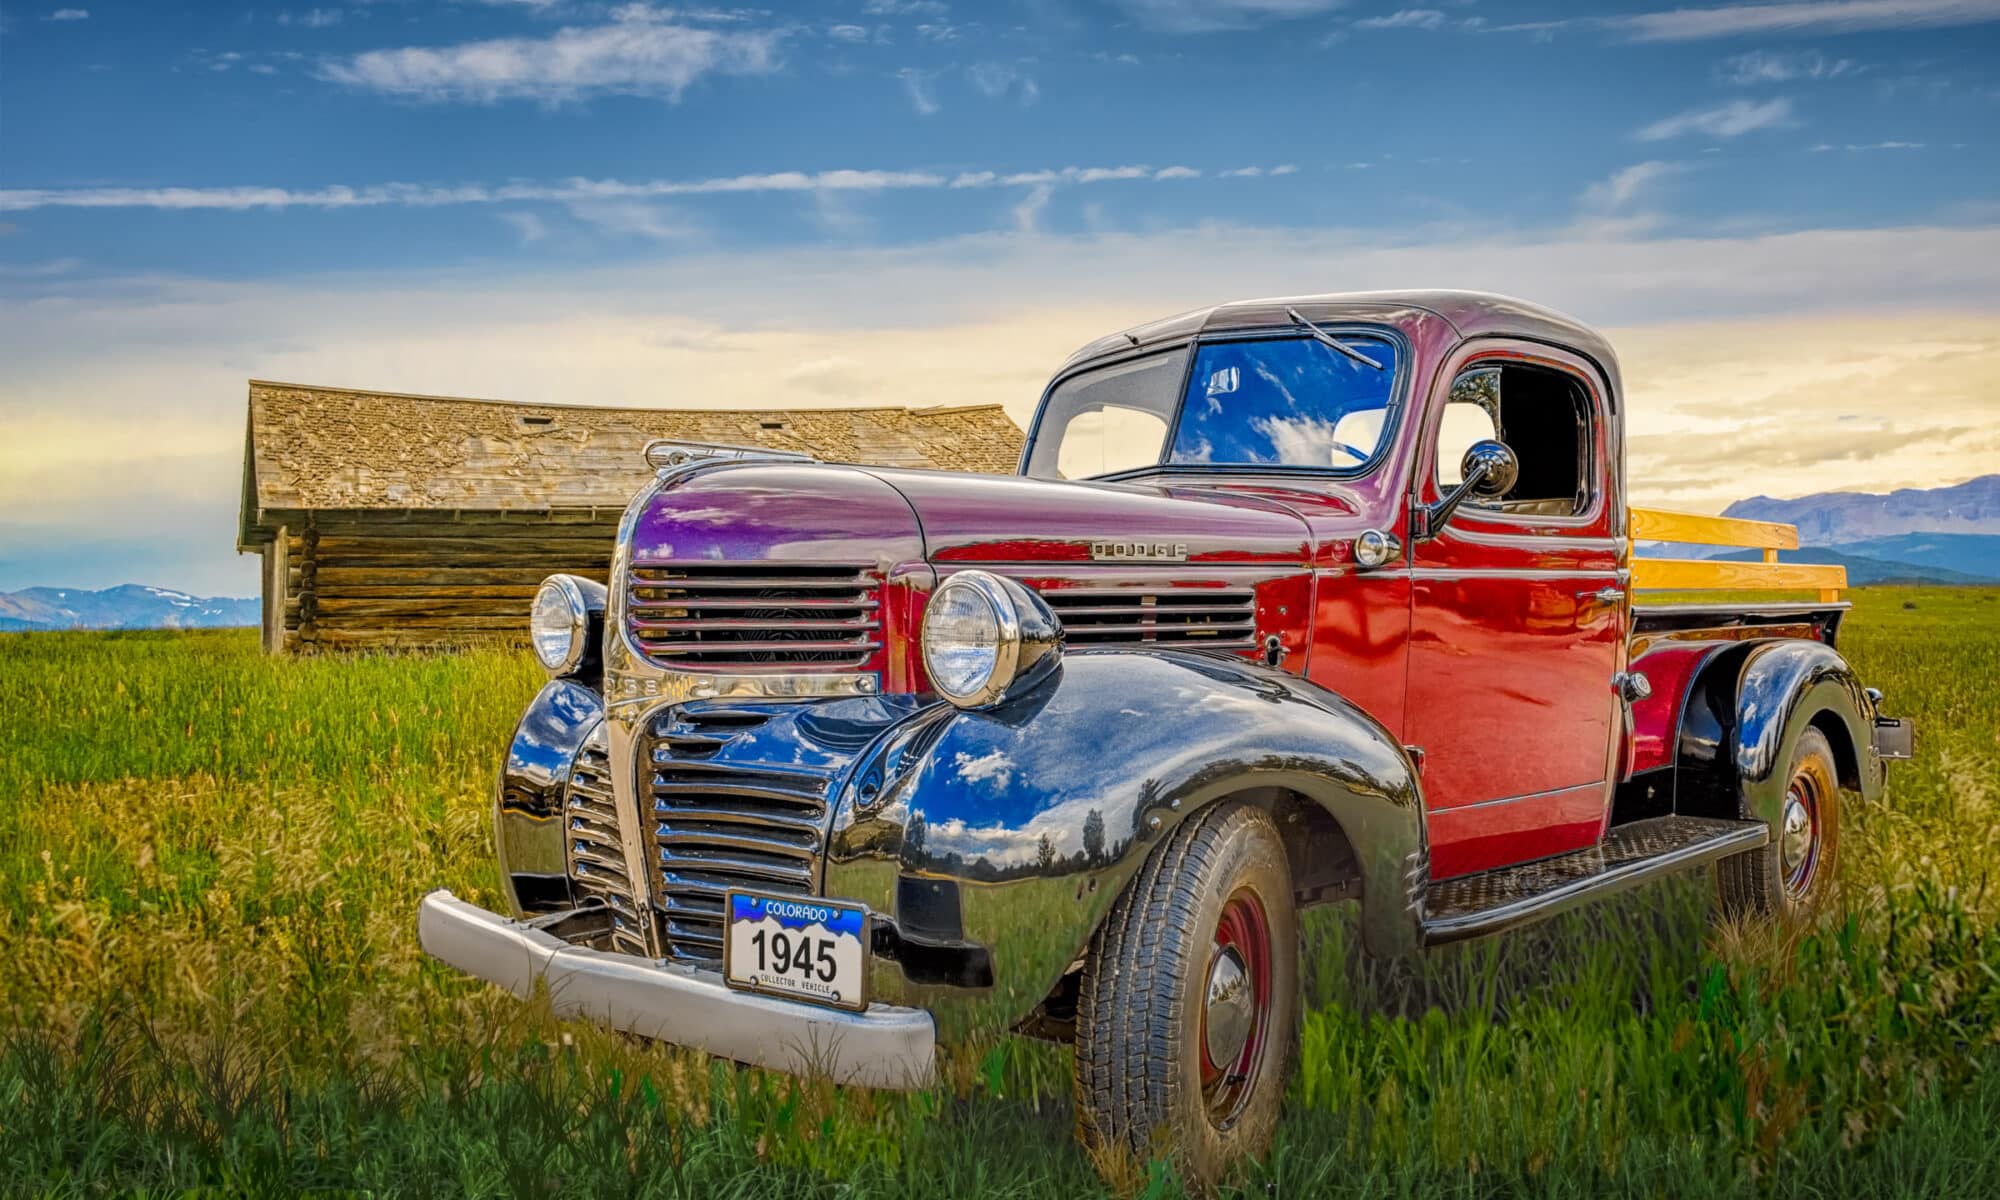 1945 Dodge Pickup Truck with red body and black fender - Automotive Photography Portfolio